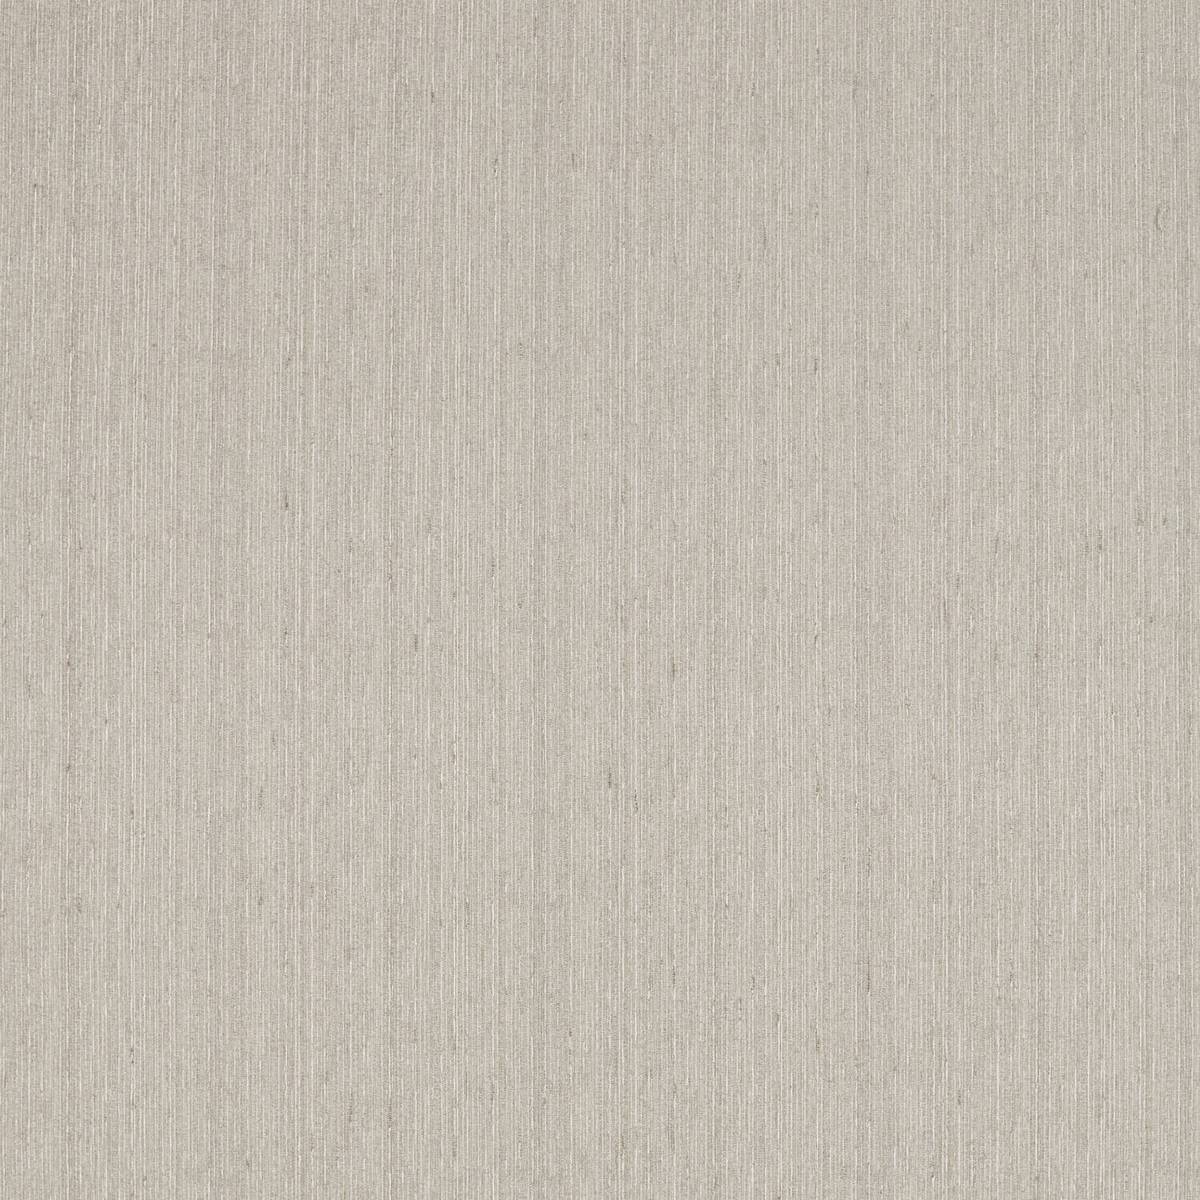 Spindlestone Natural Fabric by Sanderson